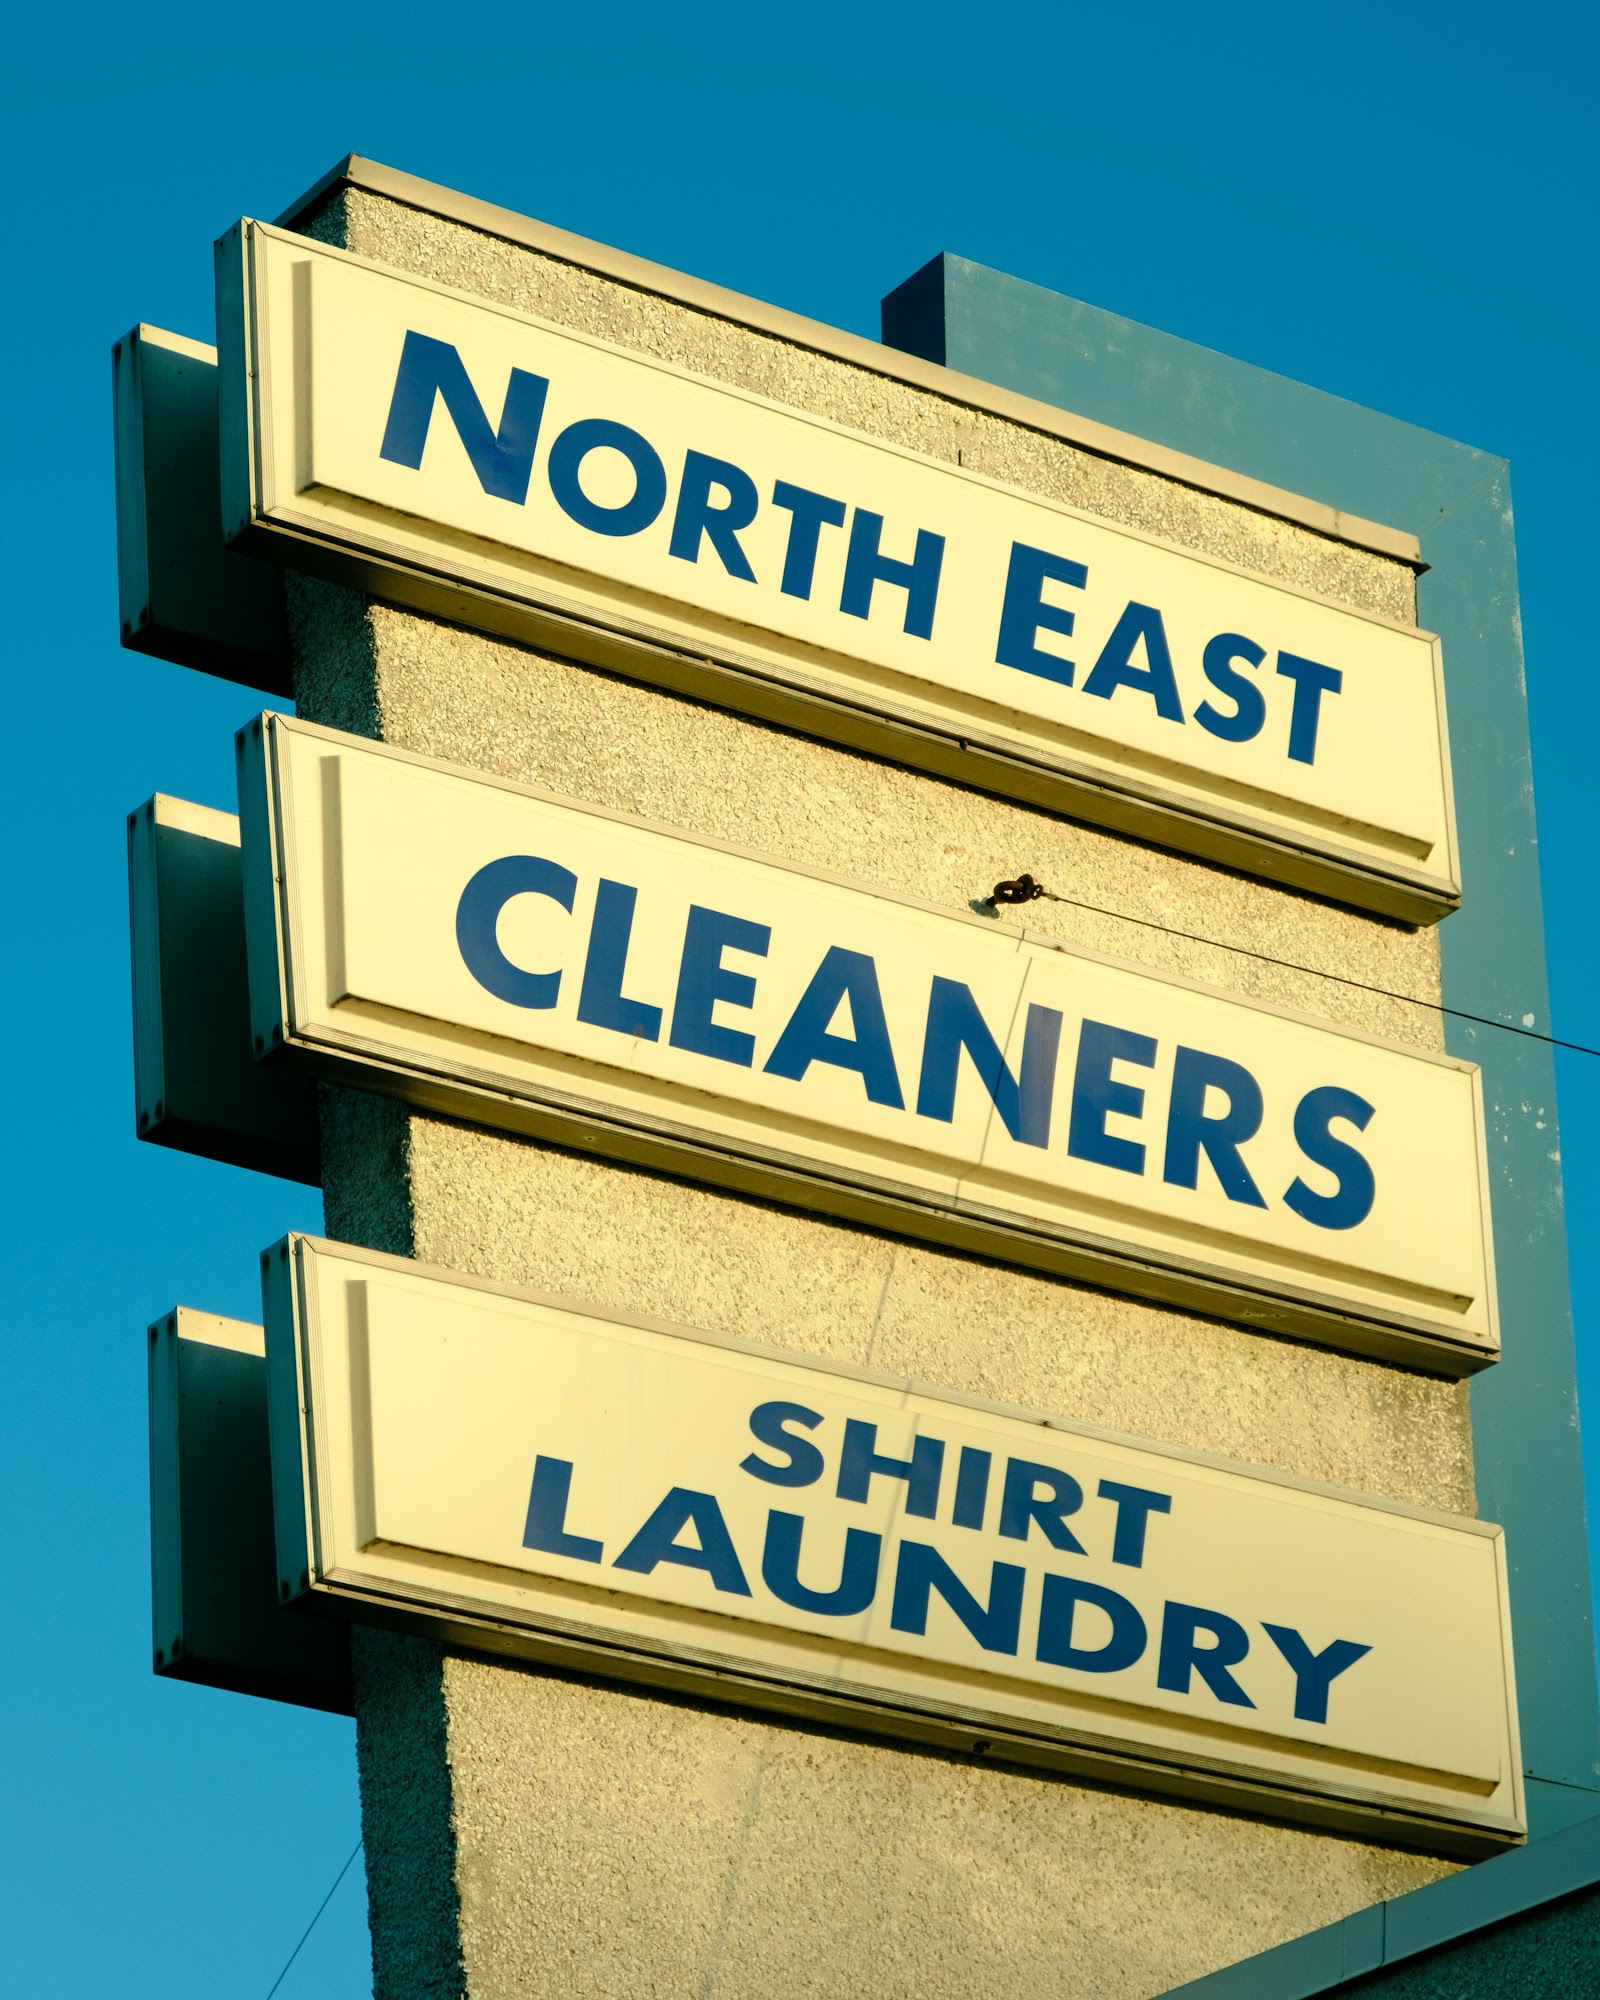 North East Cleaners & Shirt